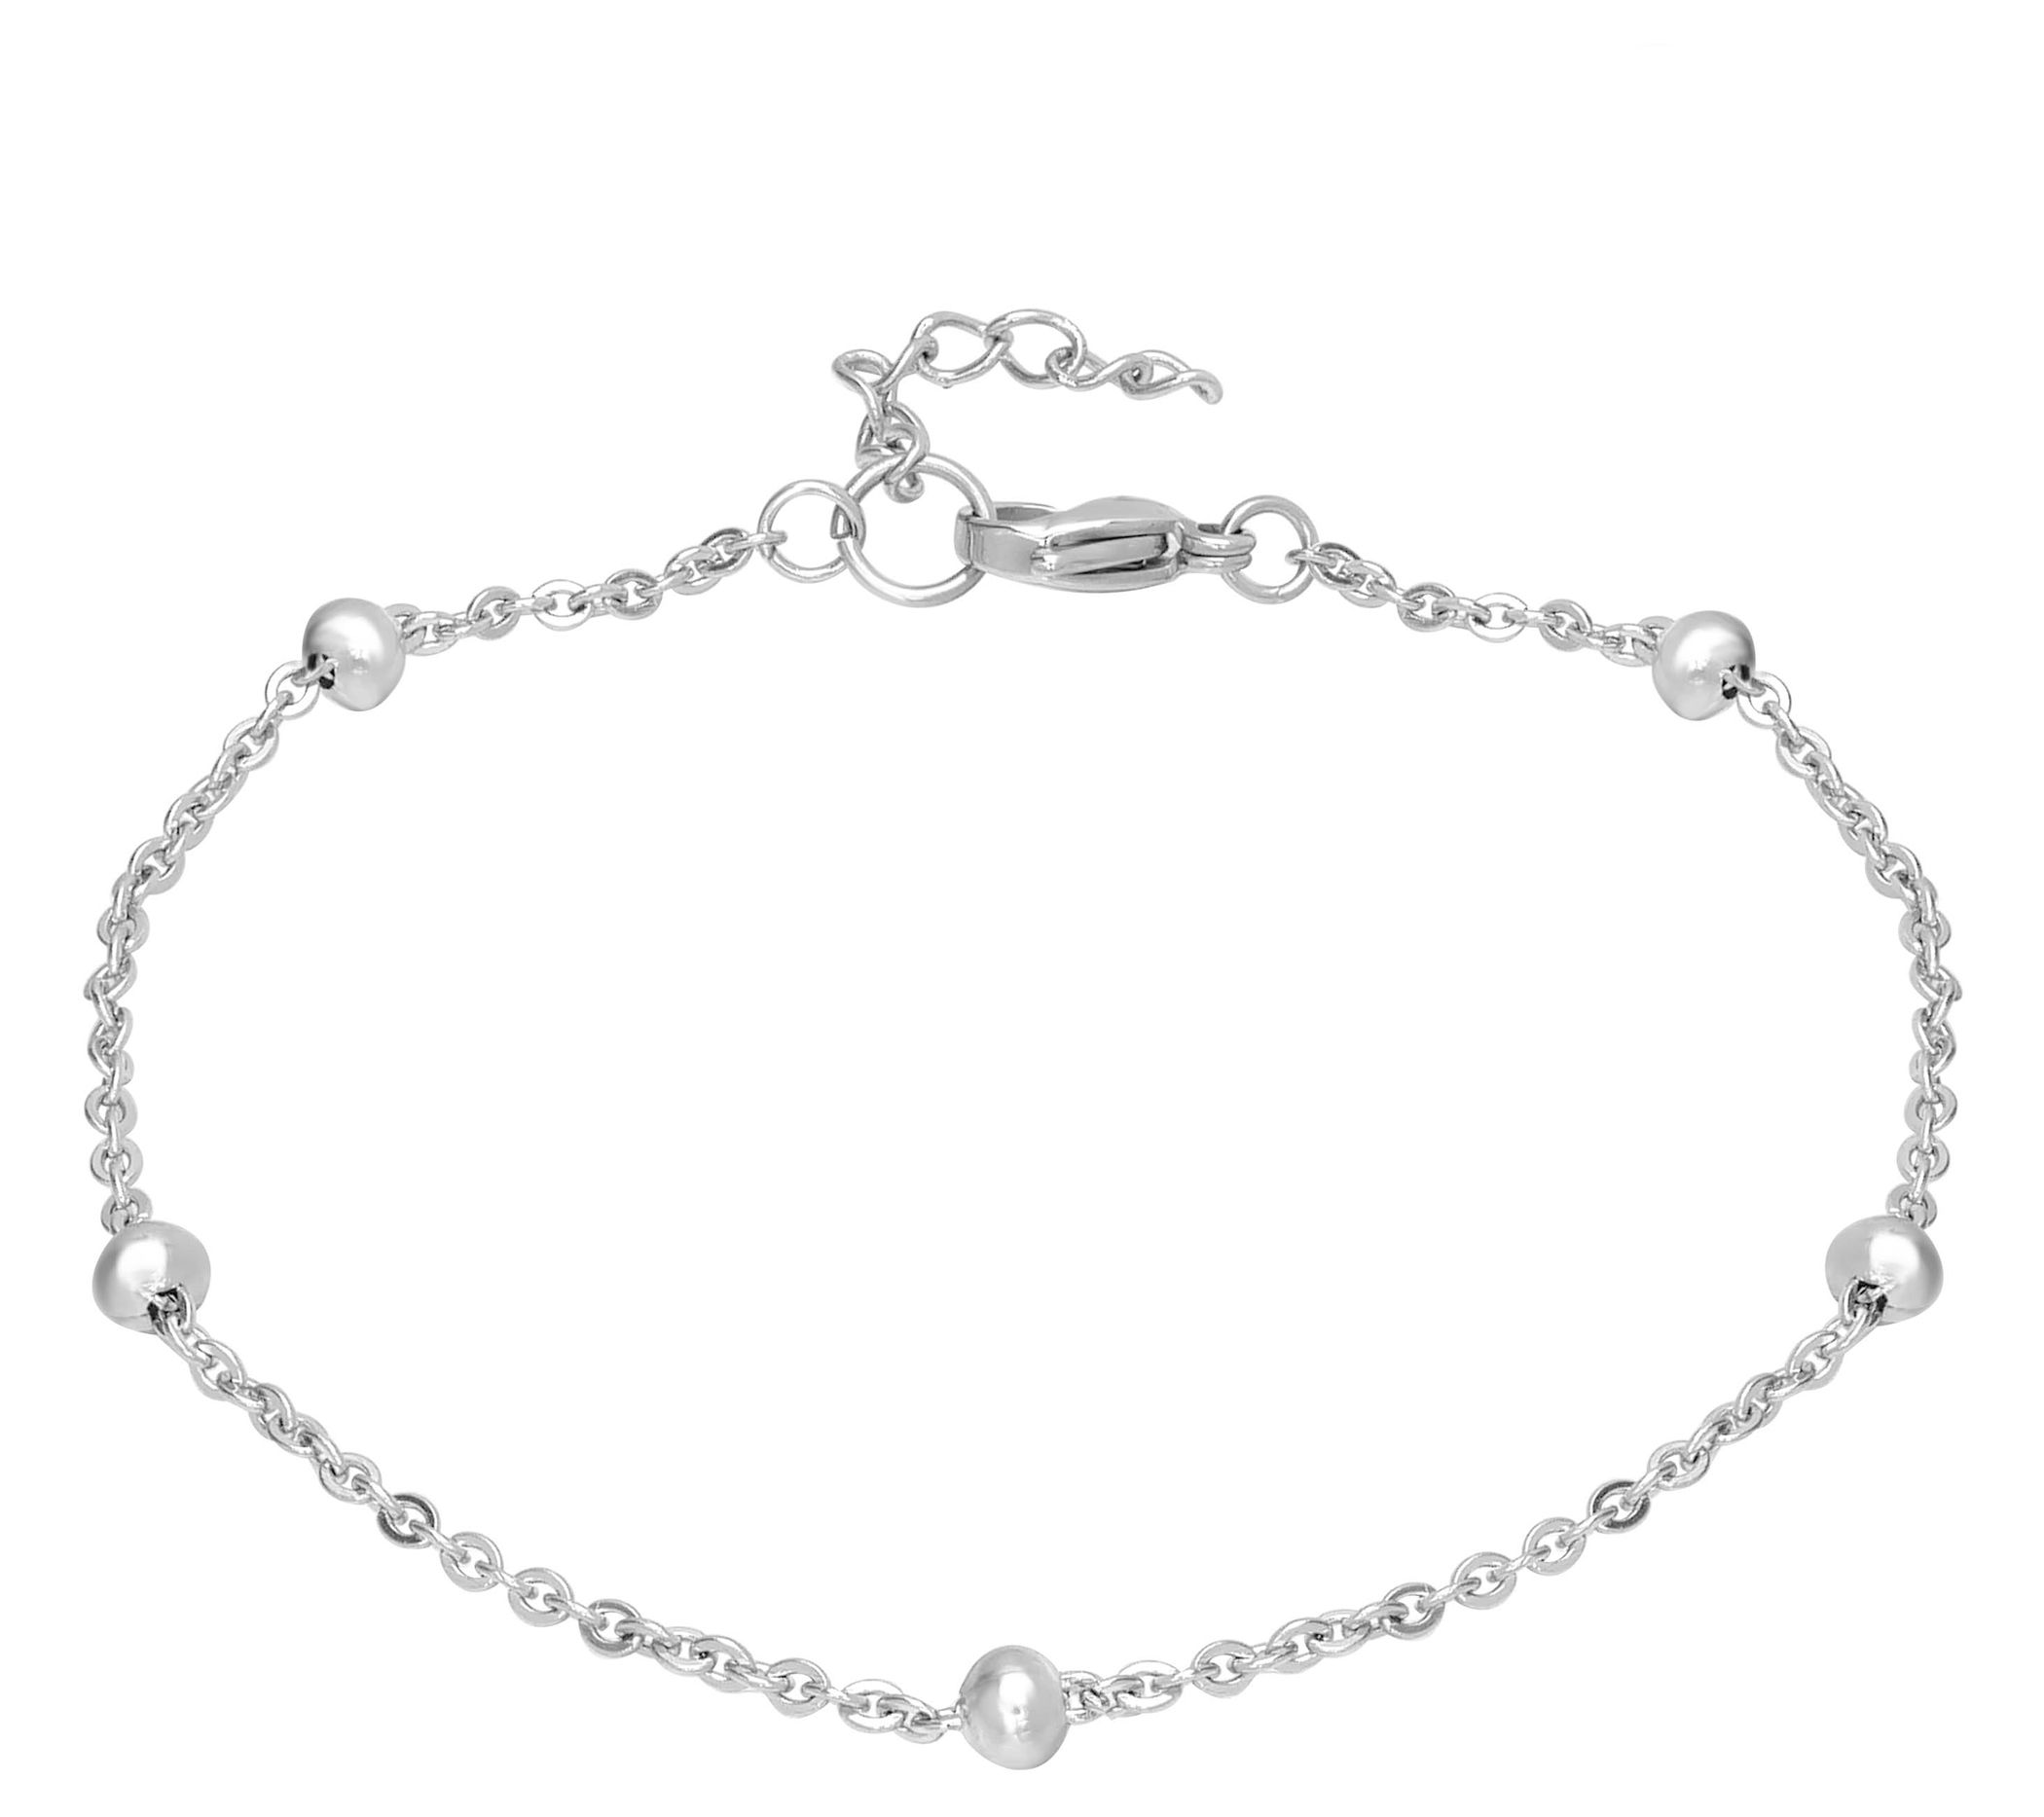 Steel by Design Set of 3 Beaded Initial Charm Bangles - QVC.com